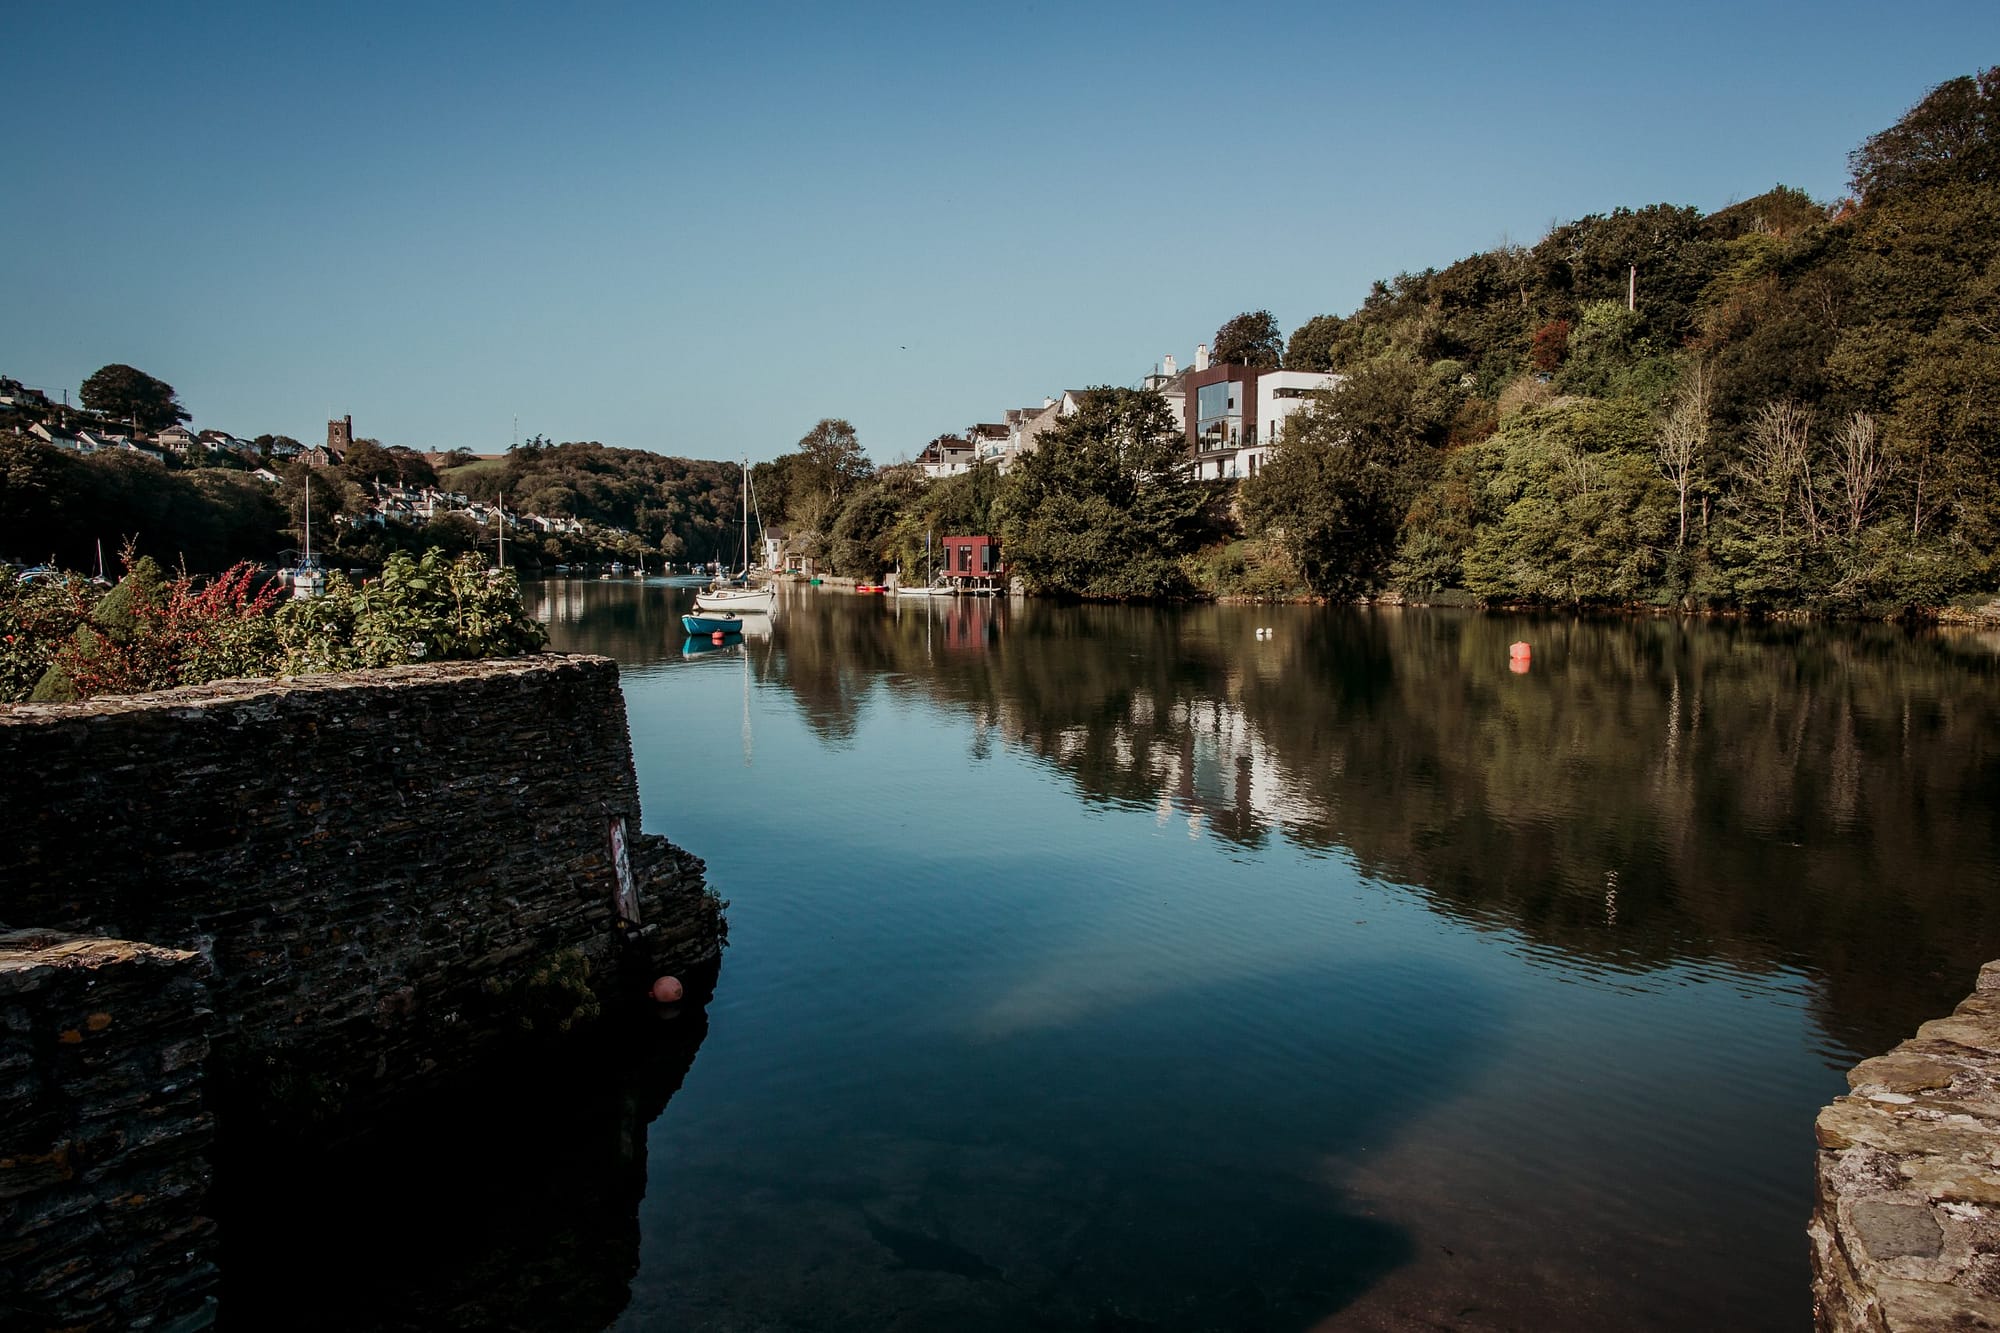 River View Noss Mayo - Holiday Cottages Noss Mayo